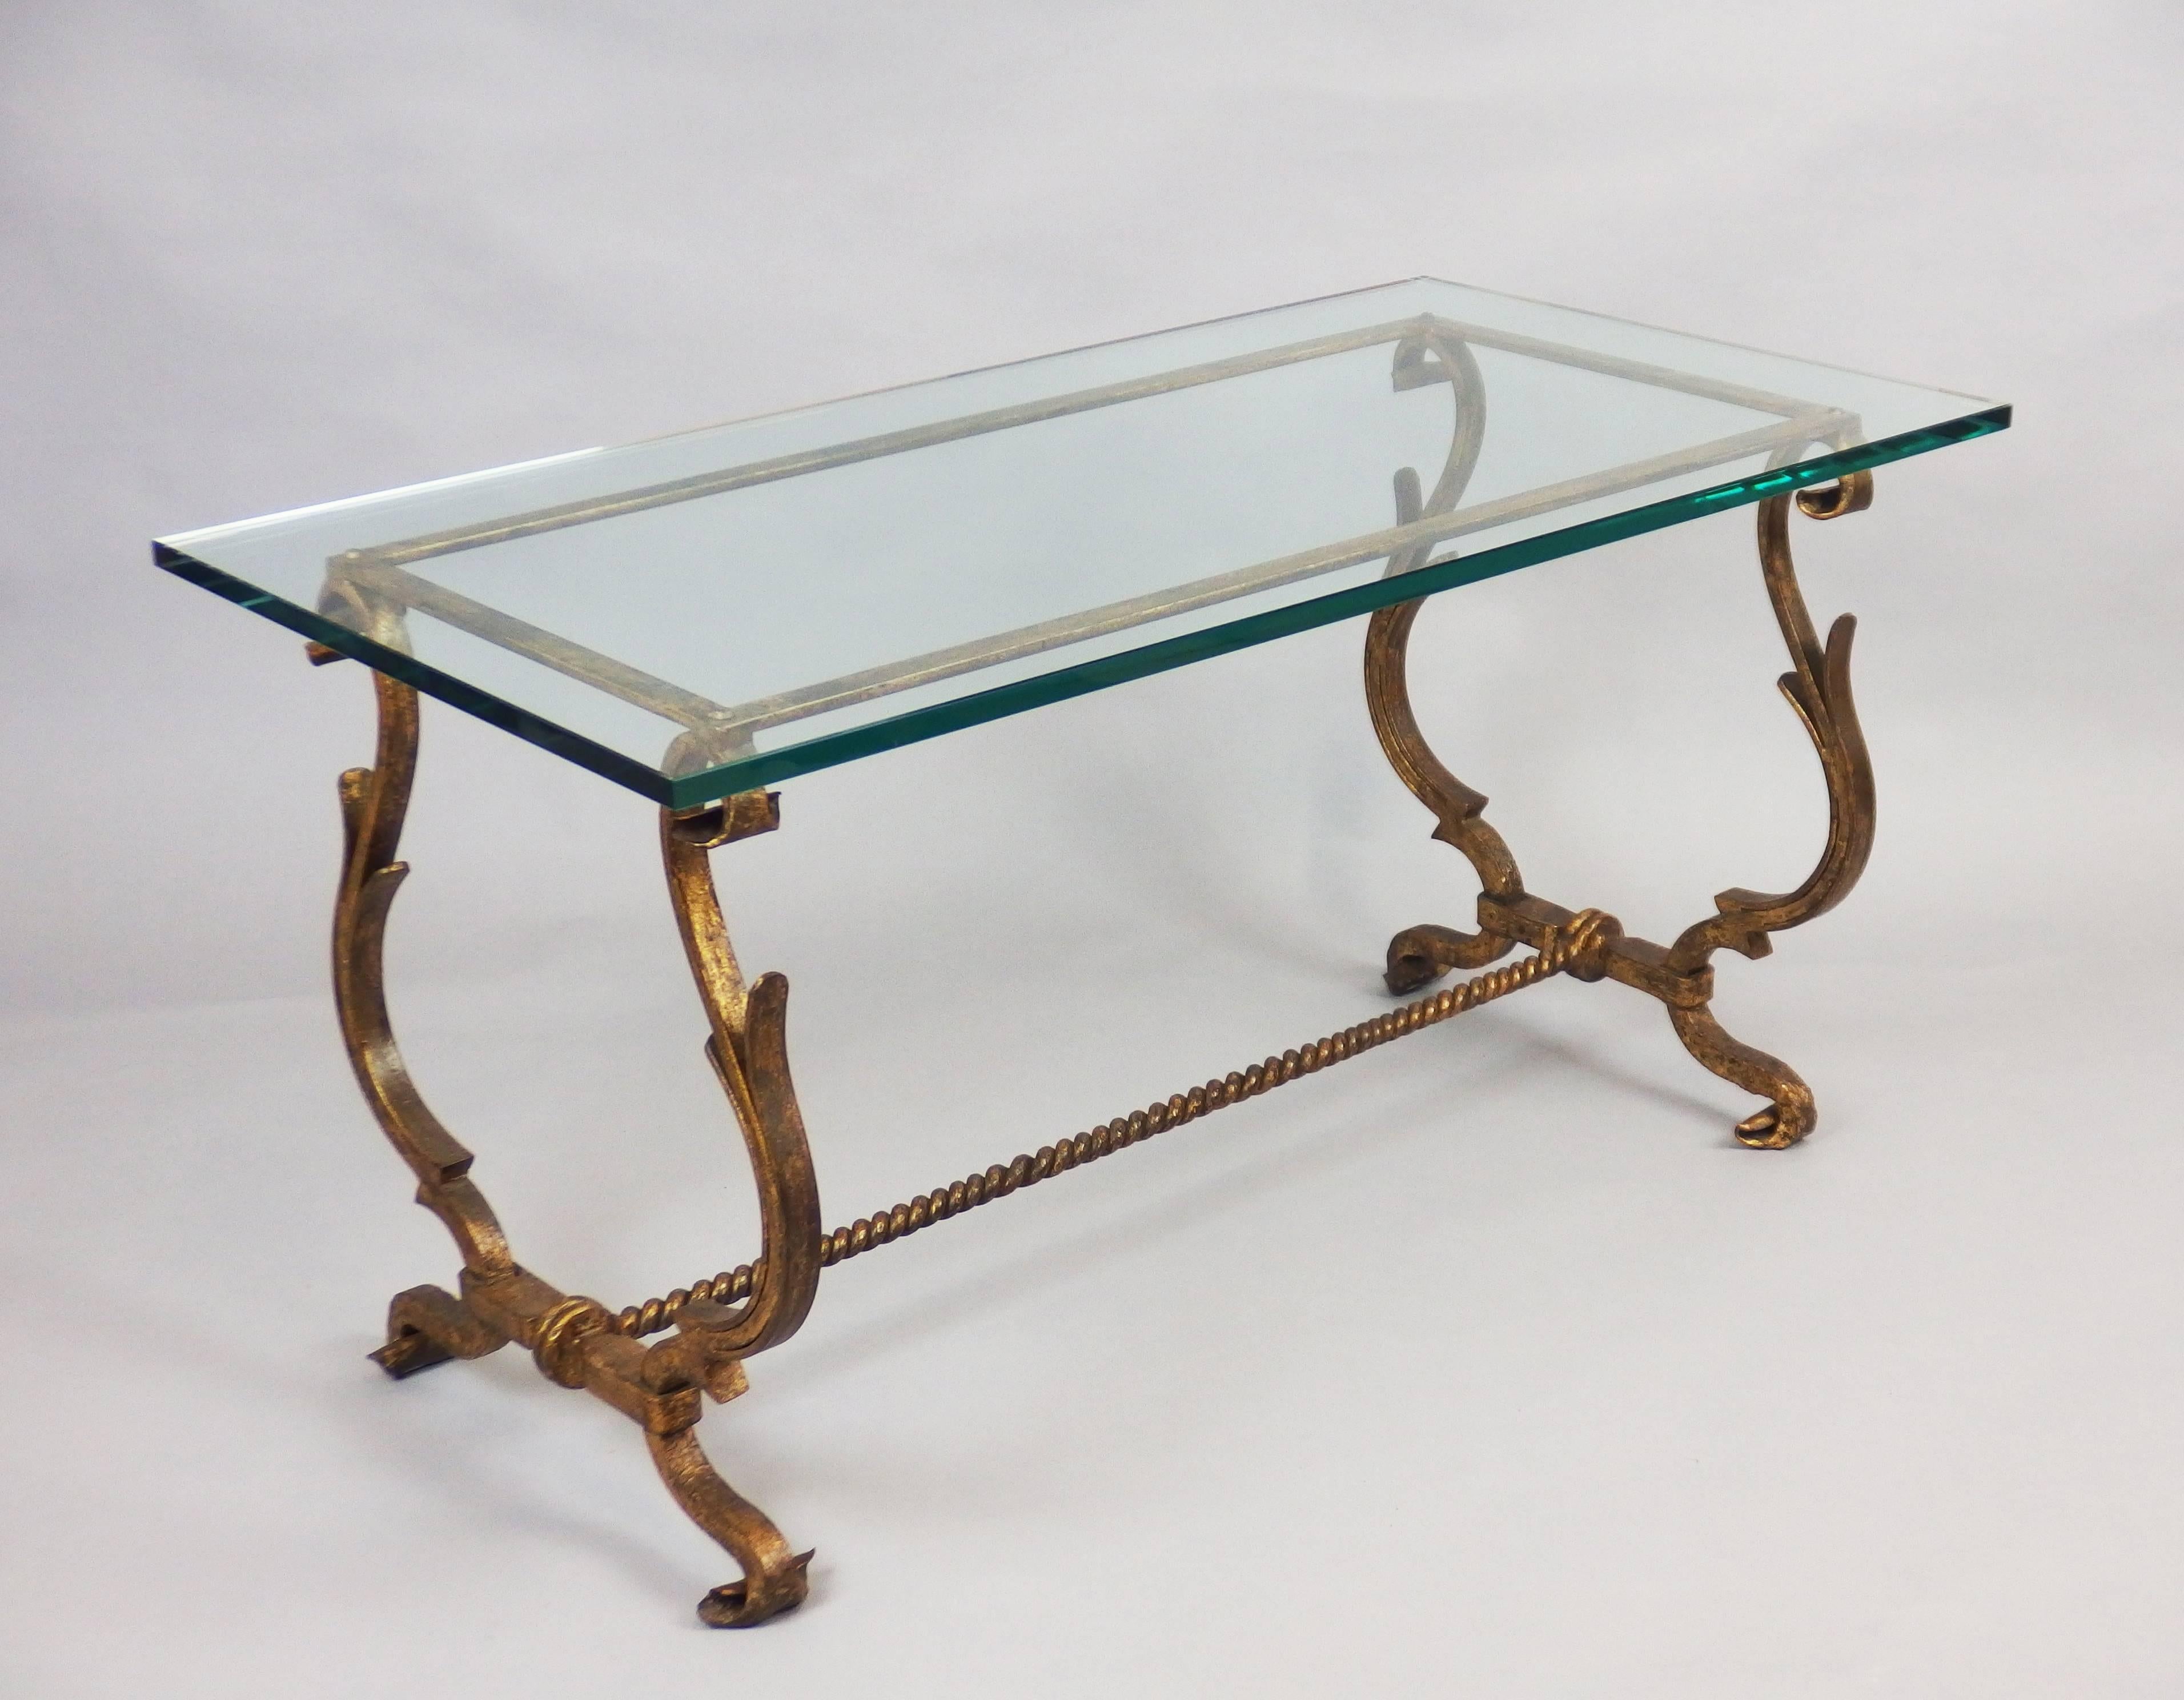 1940s wrought iron table with a gilt patina and a translucent glass top.